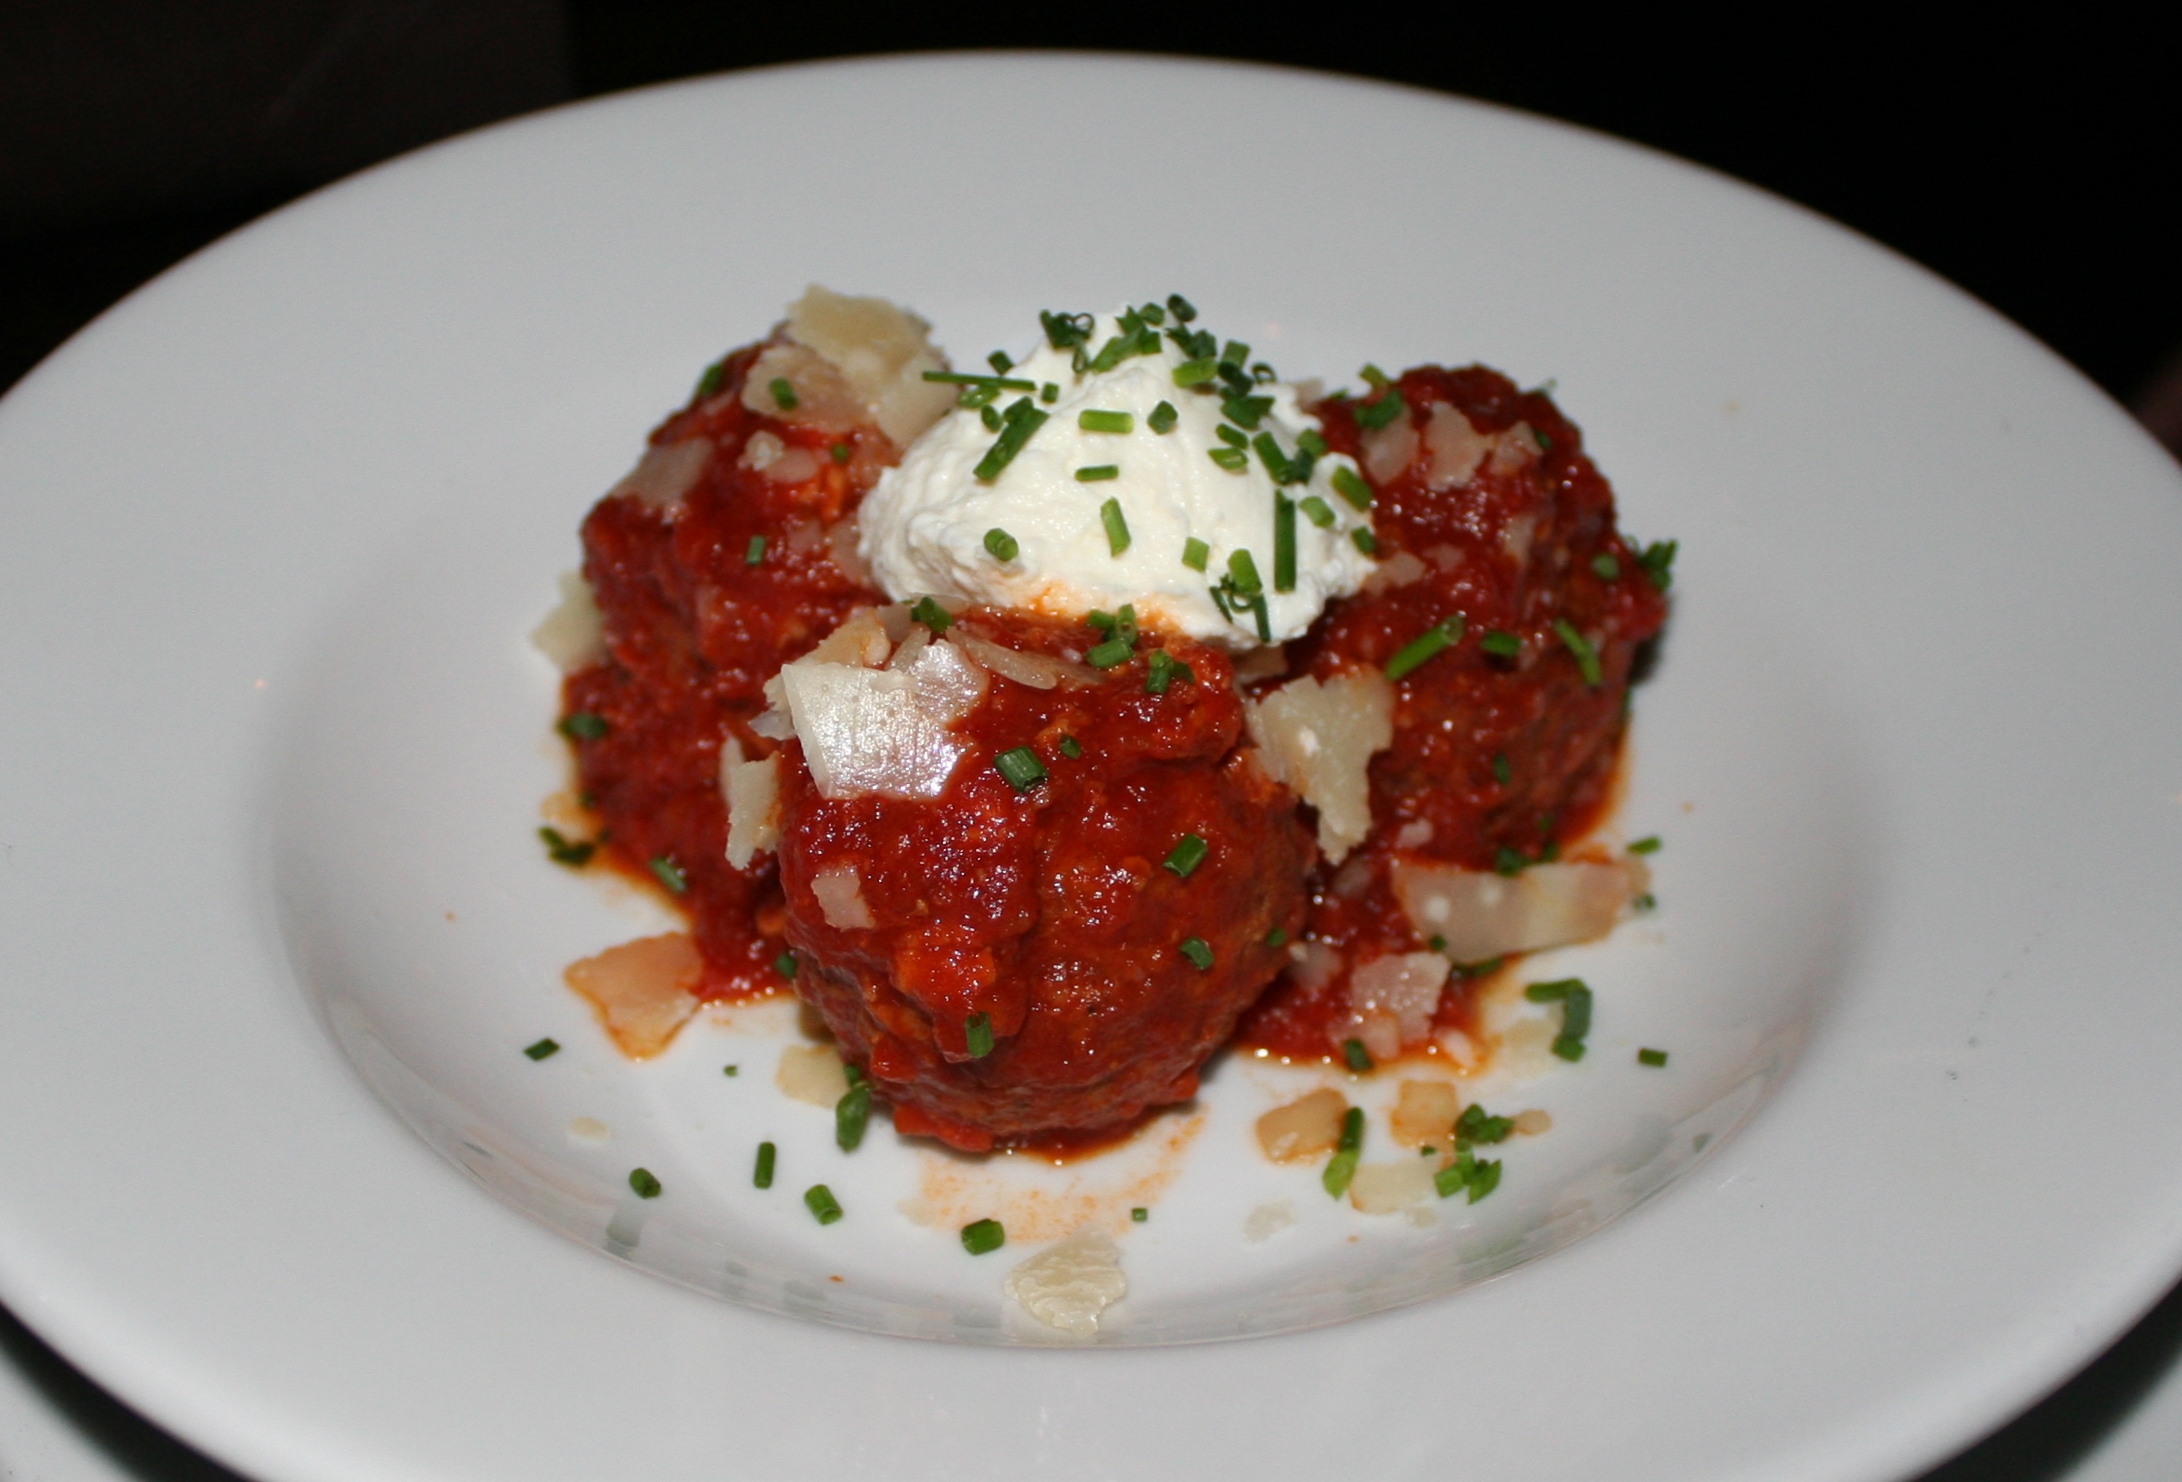 Pork meatballs with ground pork, prosciutto and mortadella with pomodoro sauce and whipped ricotta